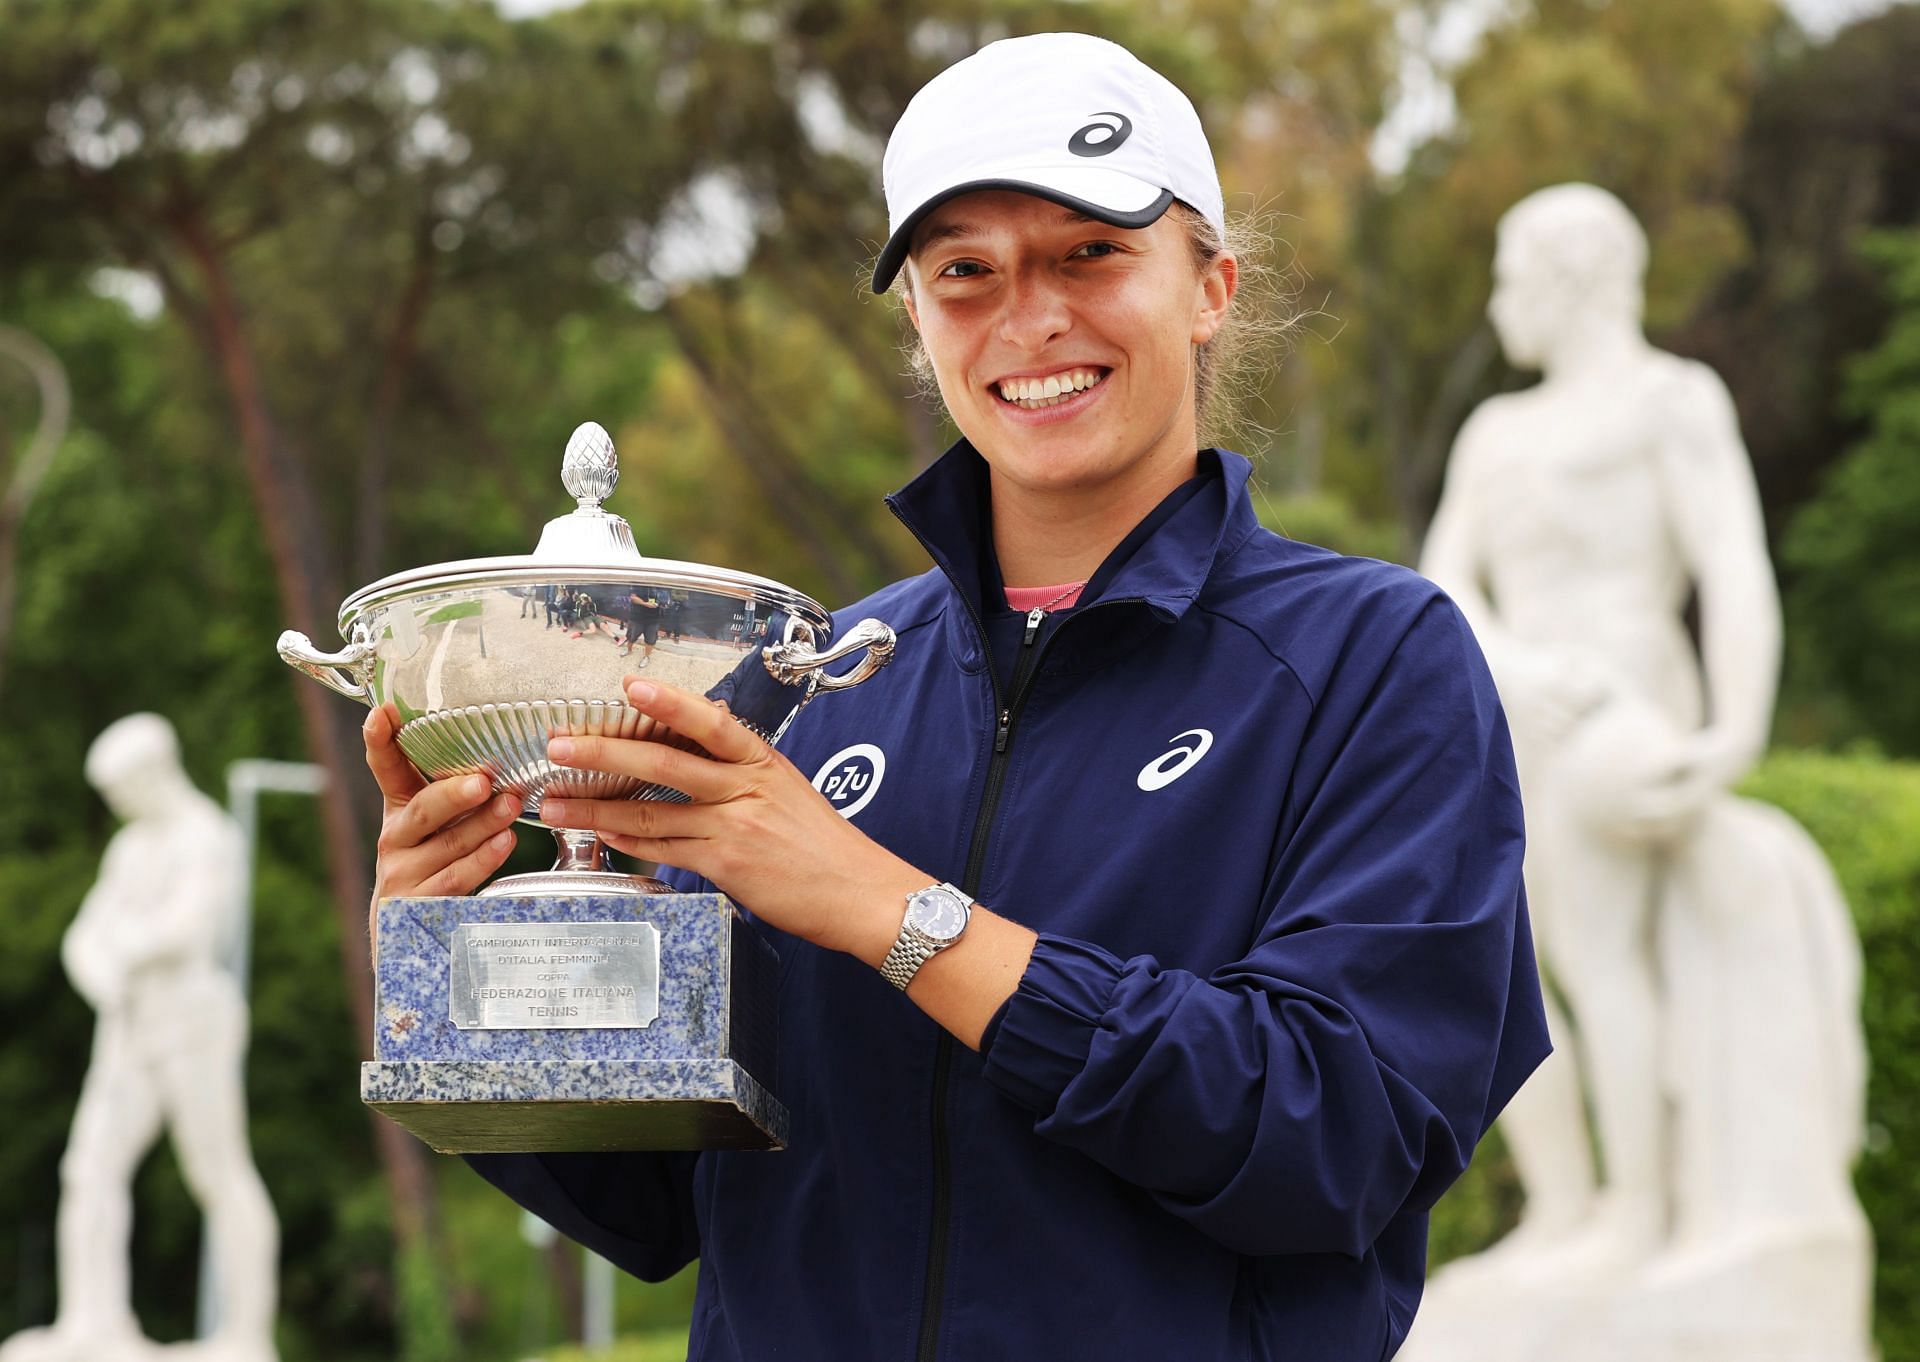 Italian Open 2022 live streaming: Draws, Schedule, Prize Money